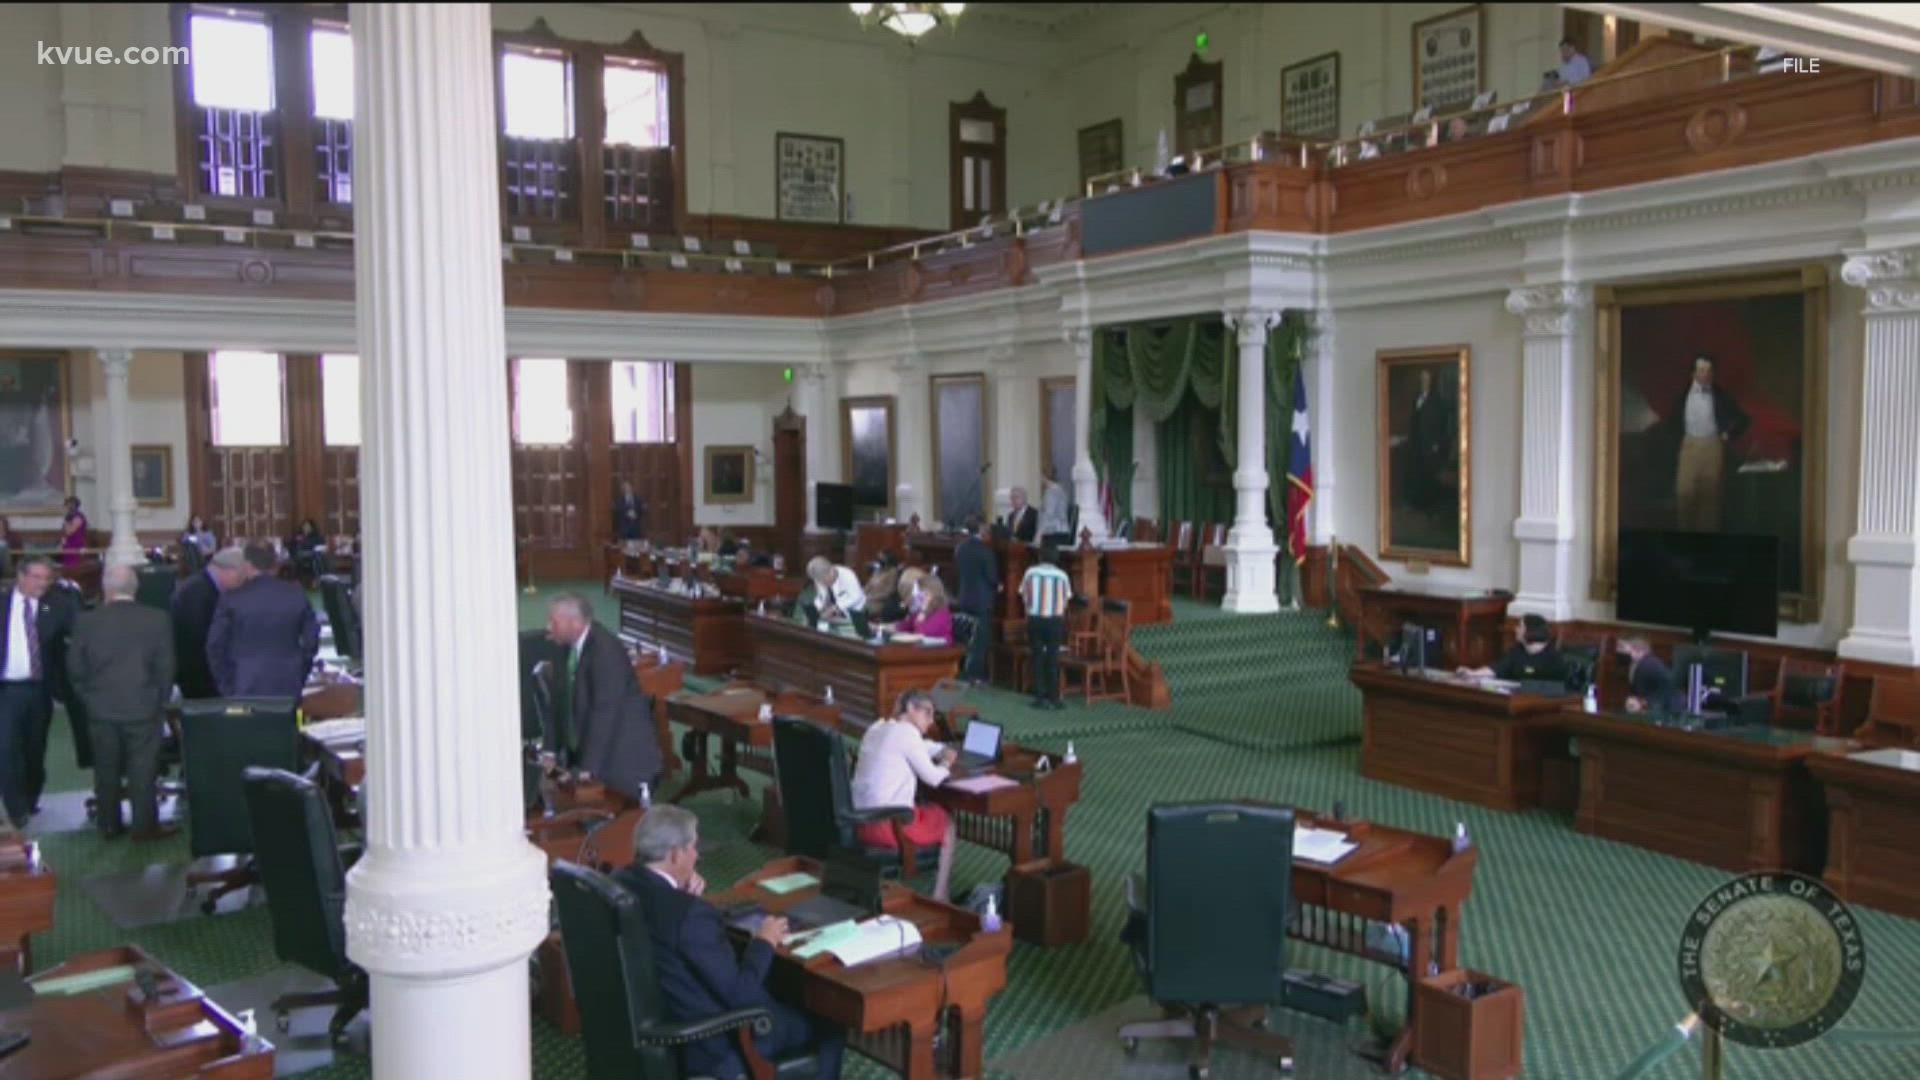 According to The Texas Tribune, some lawmakers are facing threats over the Texas Heartbeat Act.